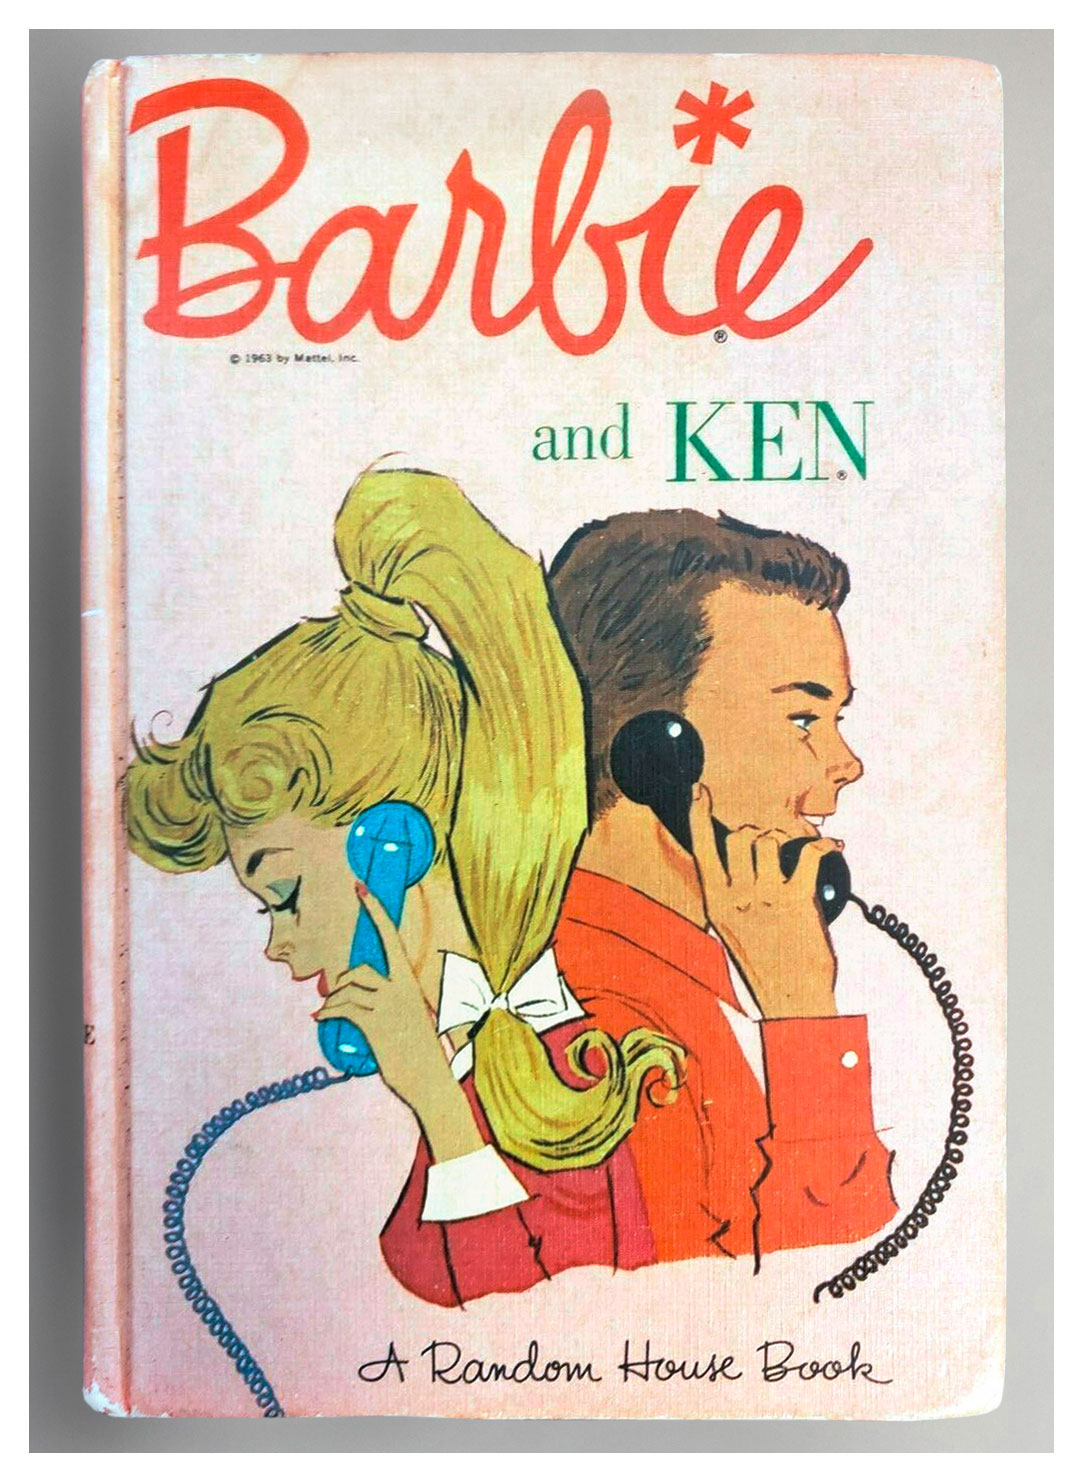 1963 Barbie and Ken book by Random House